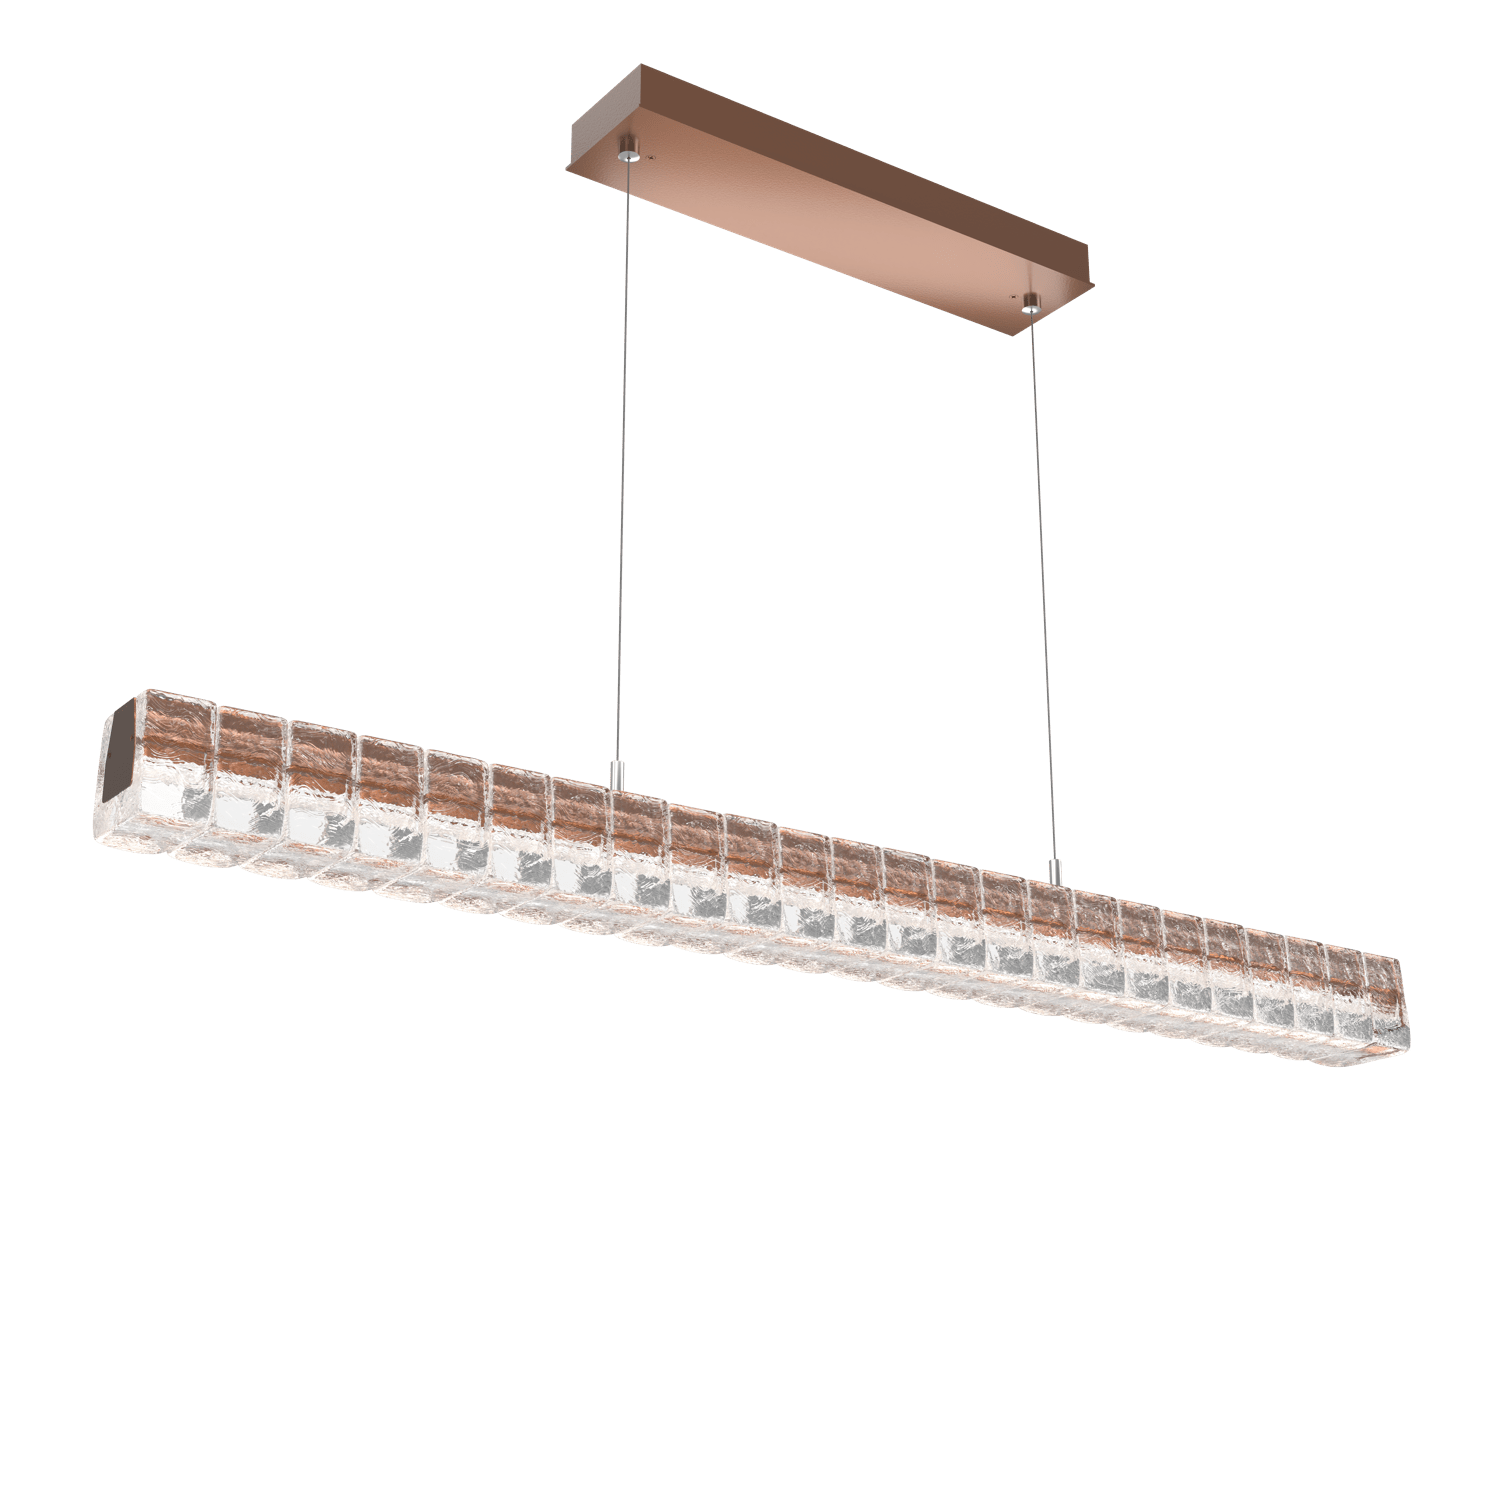 PLB0080-48-BB-Hammerton-Studio-Asscher-48-inch-linear-chandelier-with-burnished-bronze-finish-and-clear-cast-glass-shades-and-LED-lamping